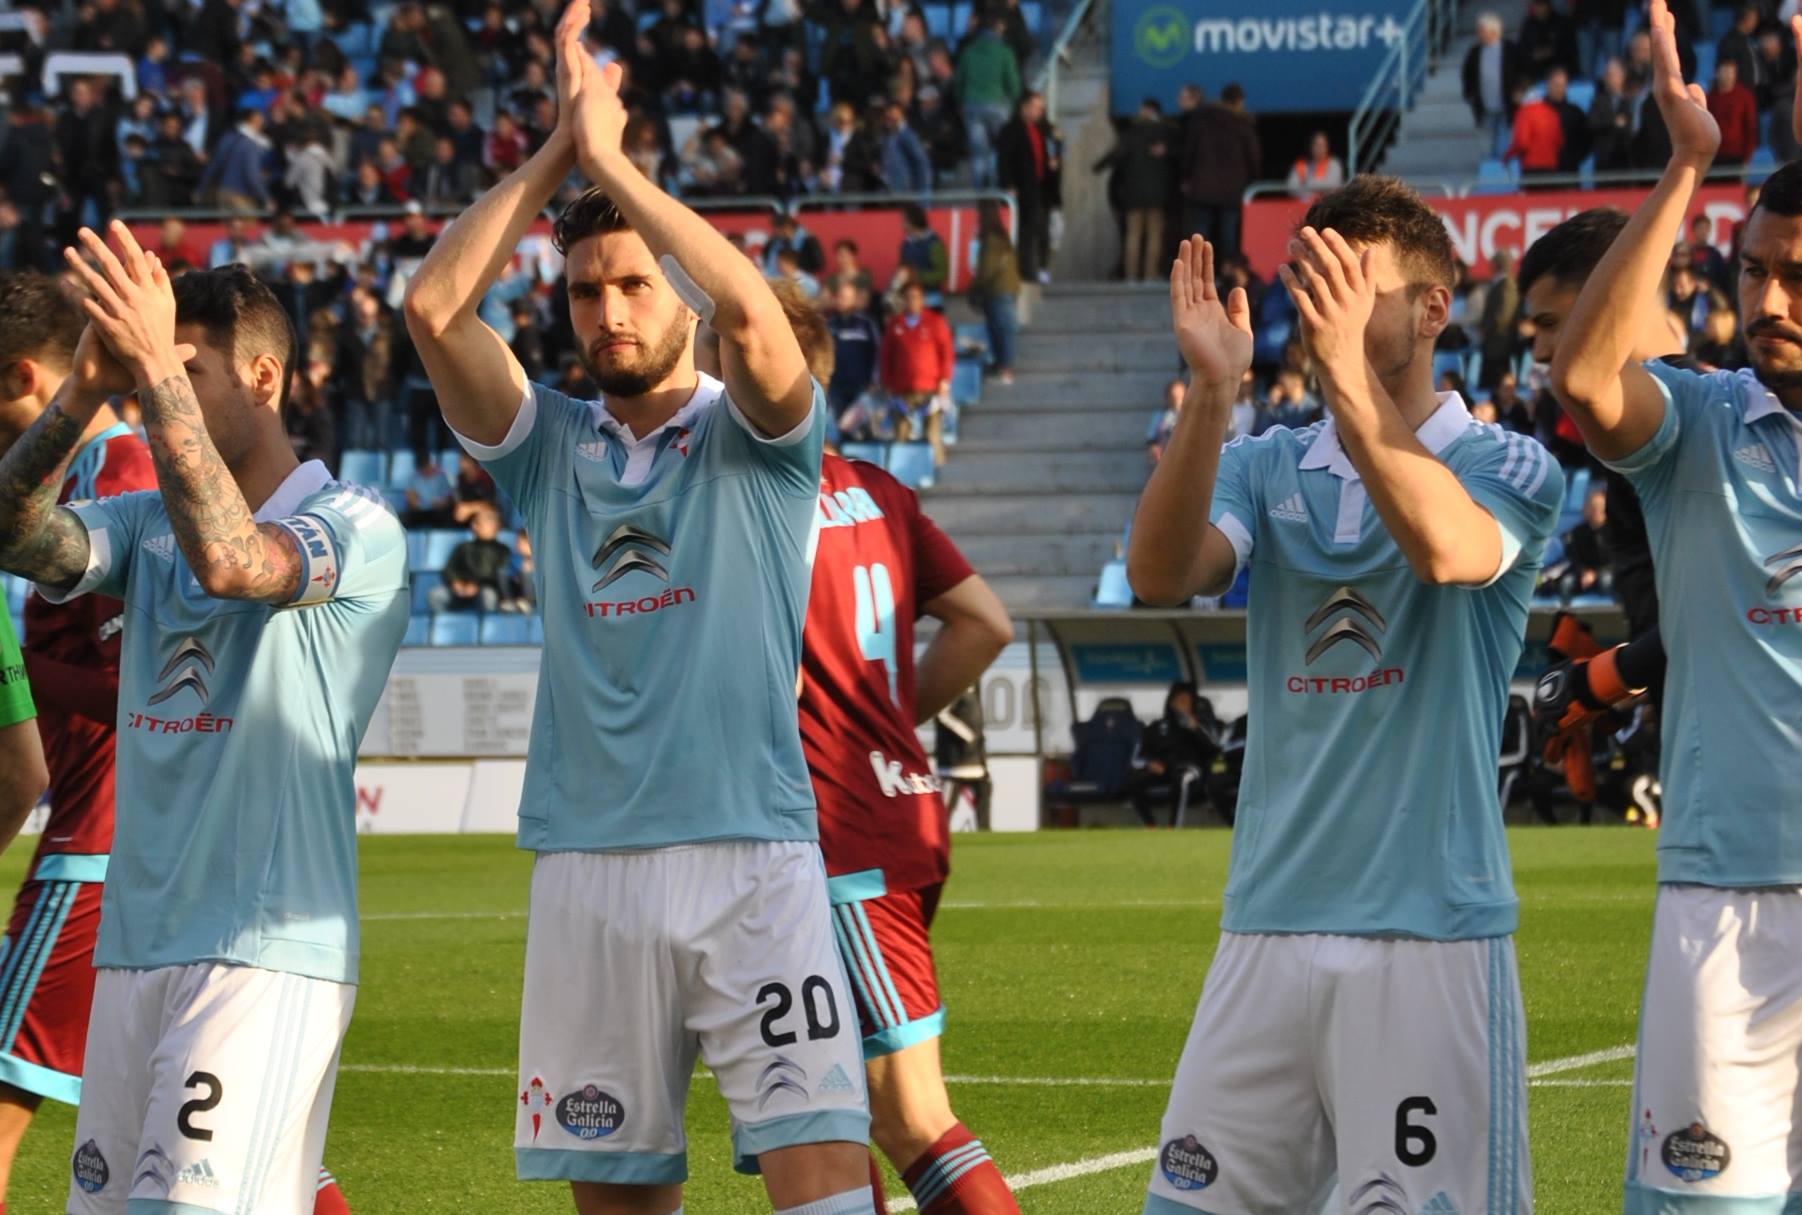 Will Celta be able to avenge last time's defeat at Riazor?